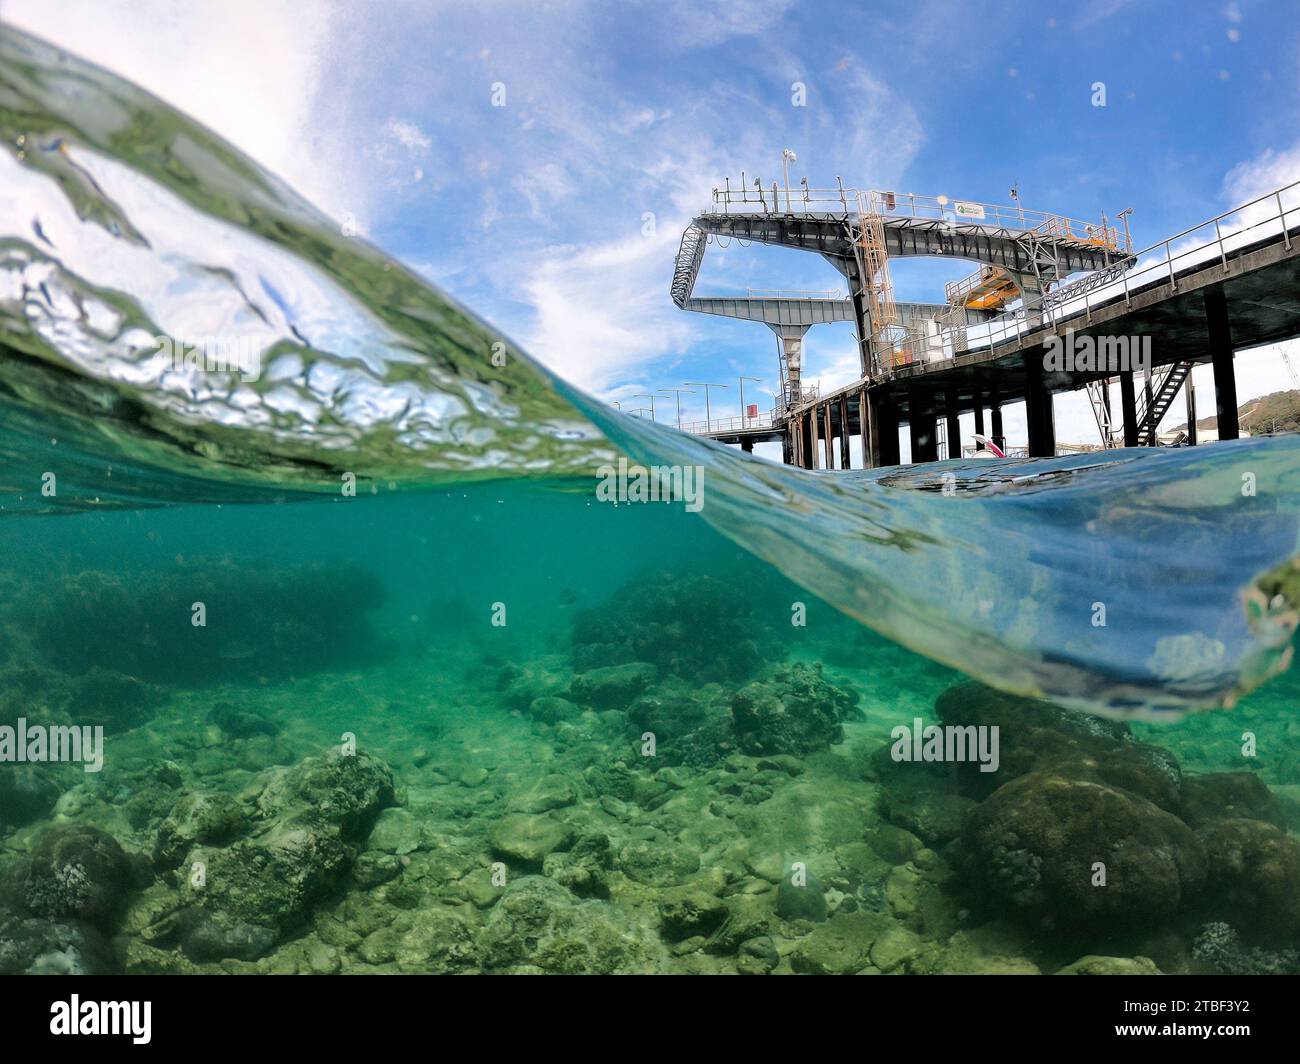 Snorkeling by the jetty at Flying Fish Cove, Christmas Island, Australia Stock Photo